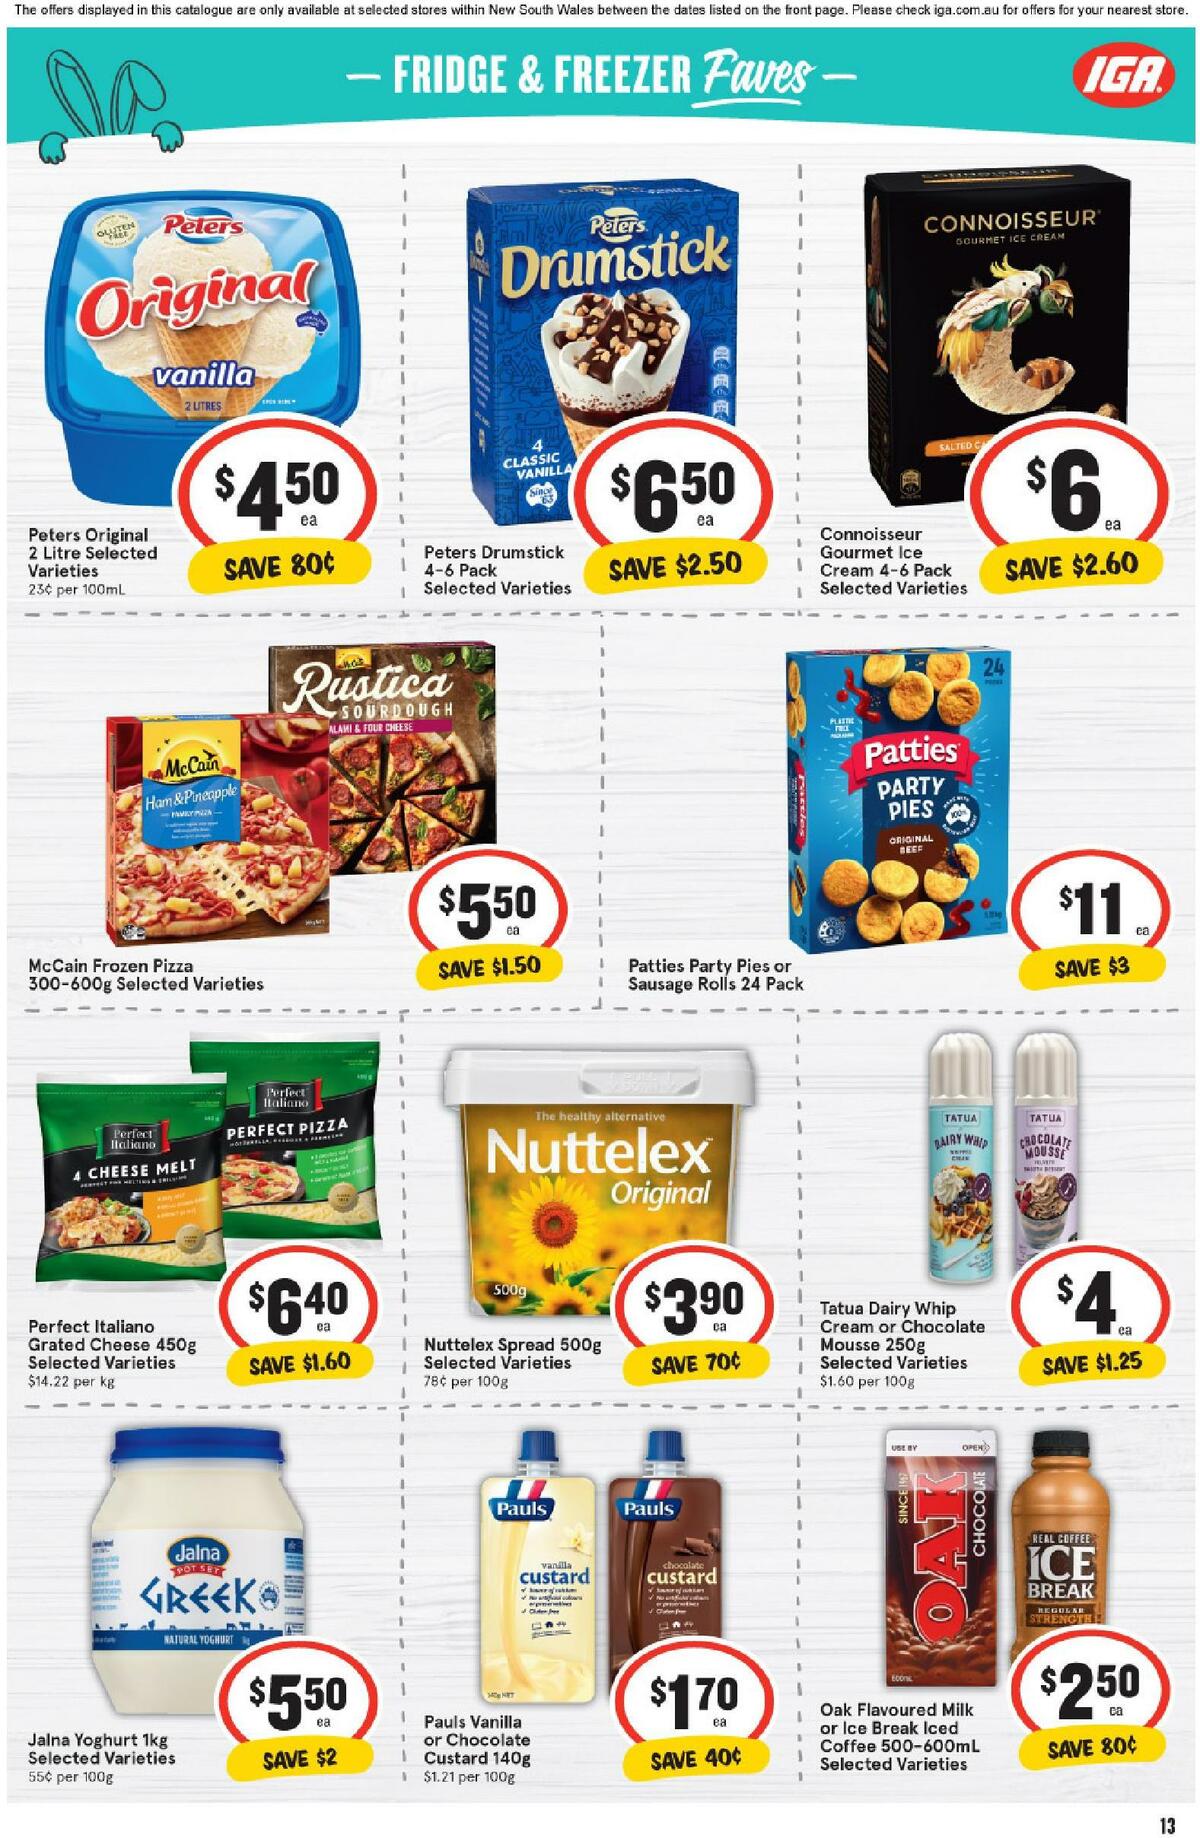 IGA Catalogues from 6 April